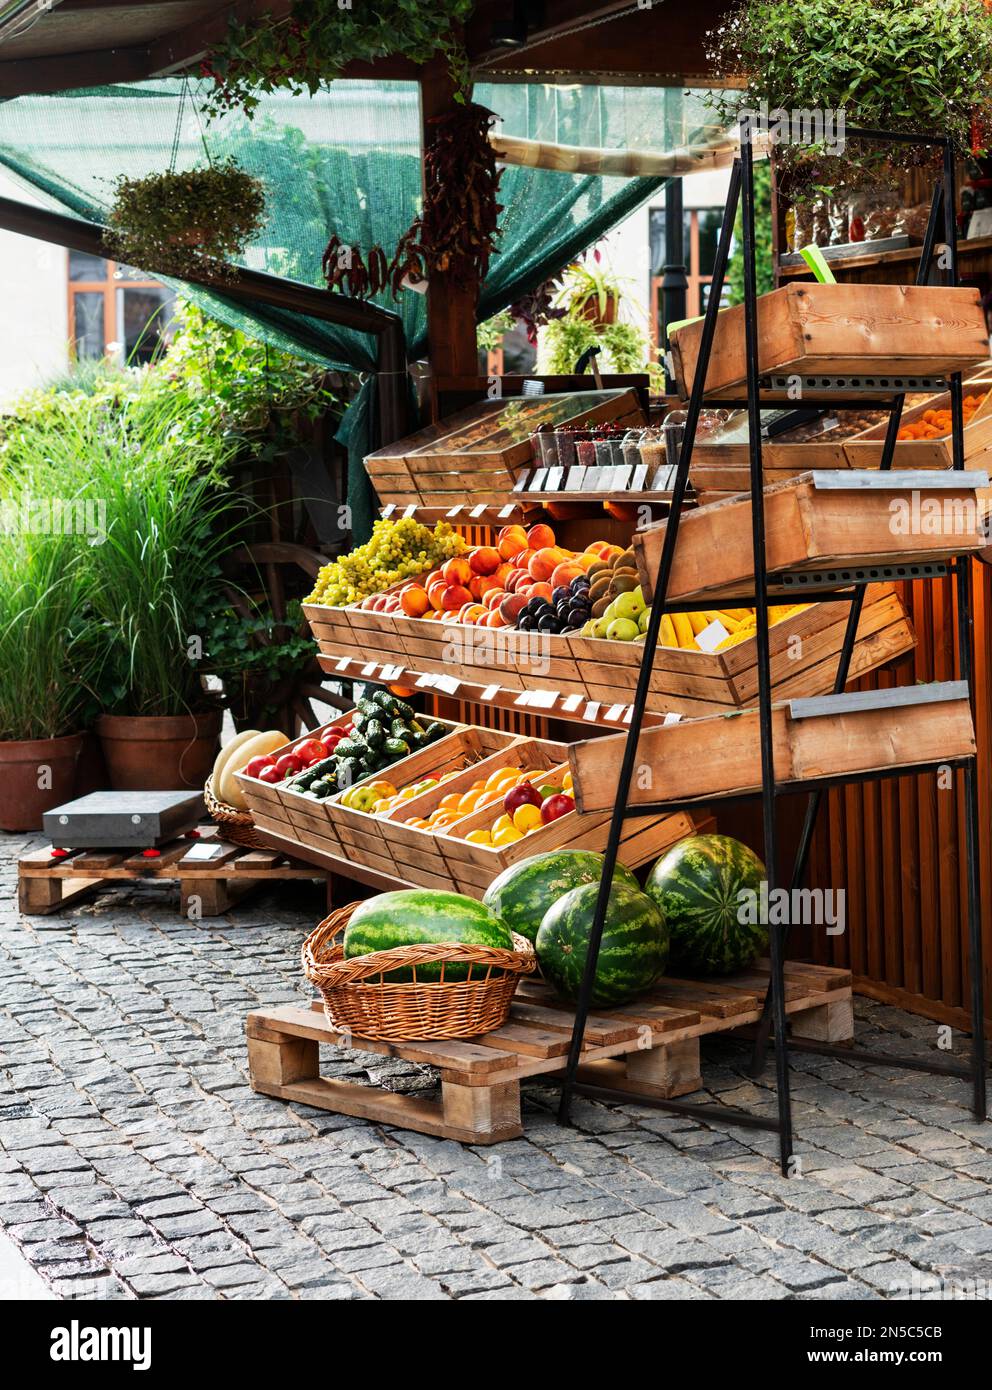 Fruit stand at a street market outside with organic watermelons, oranges, lemons in wooden crates small business vegan healthy food Stock Photo